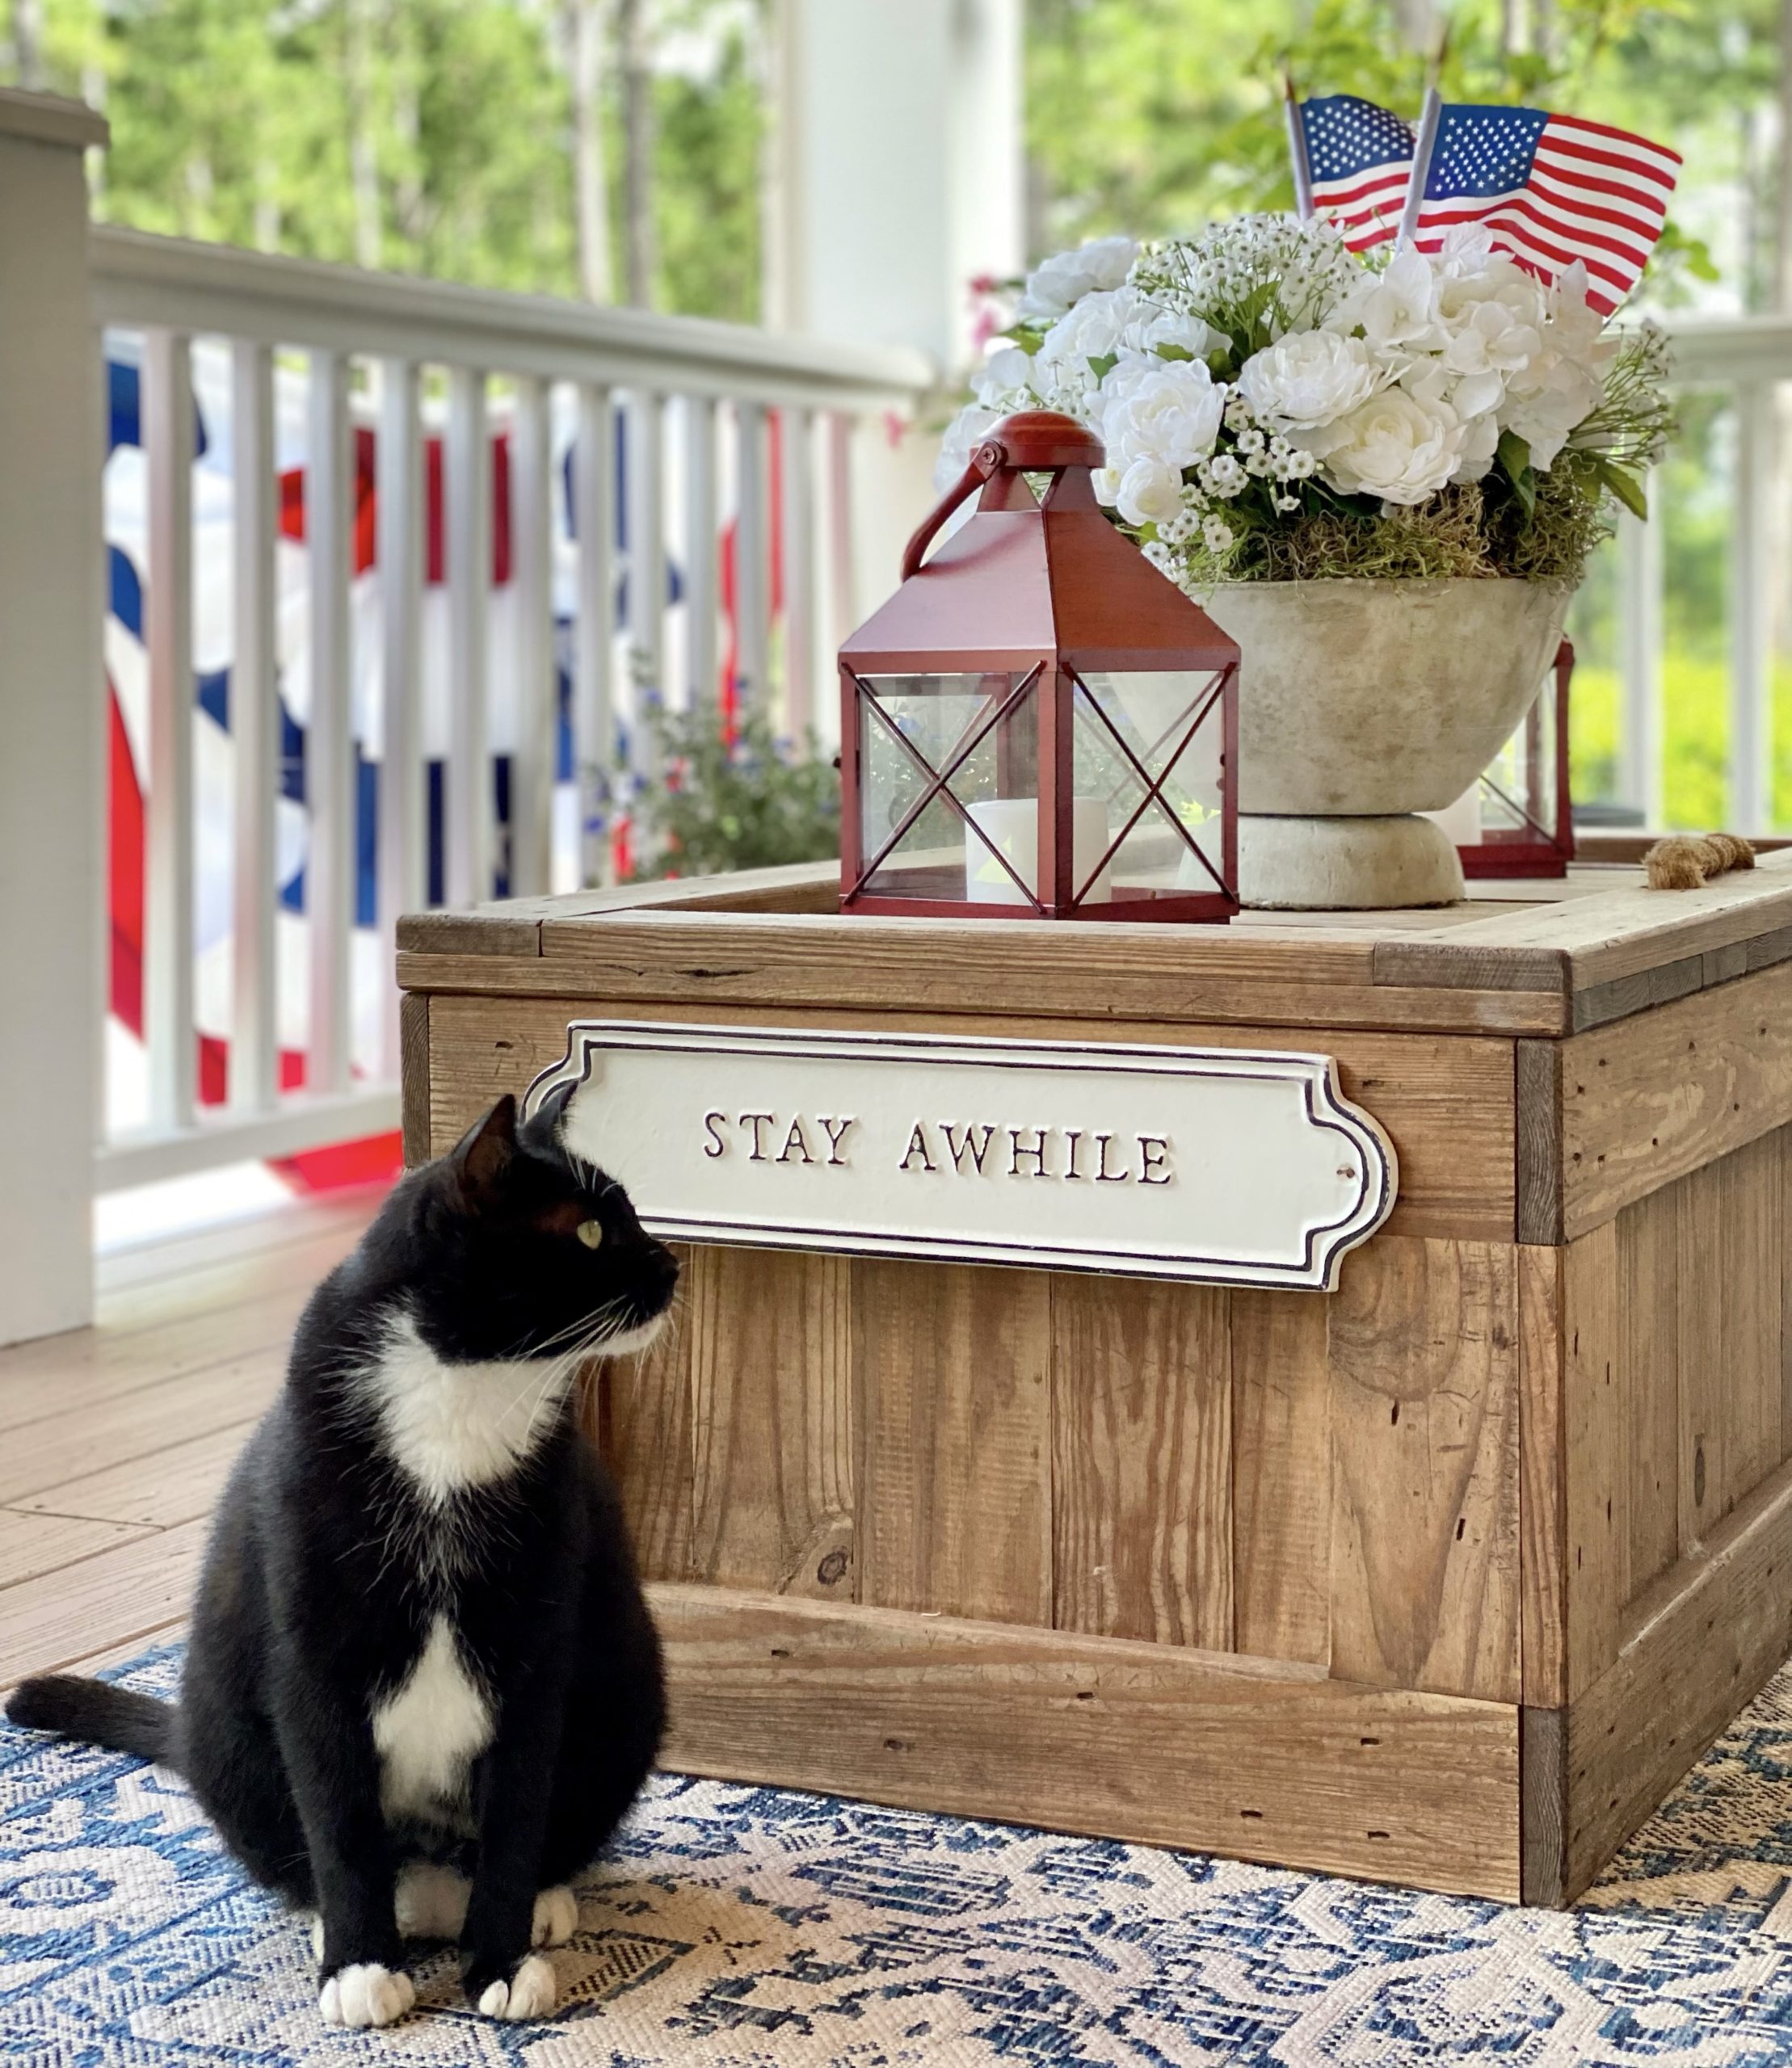 A black and white cat sitting in front of the coffee table decorated with touches of red, white, and blue on the front porch.